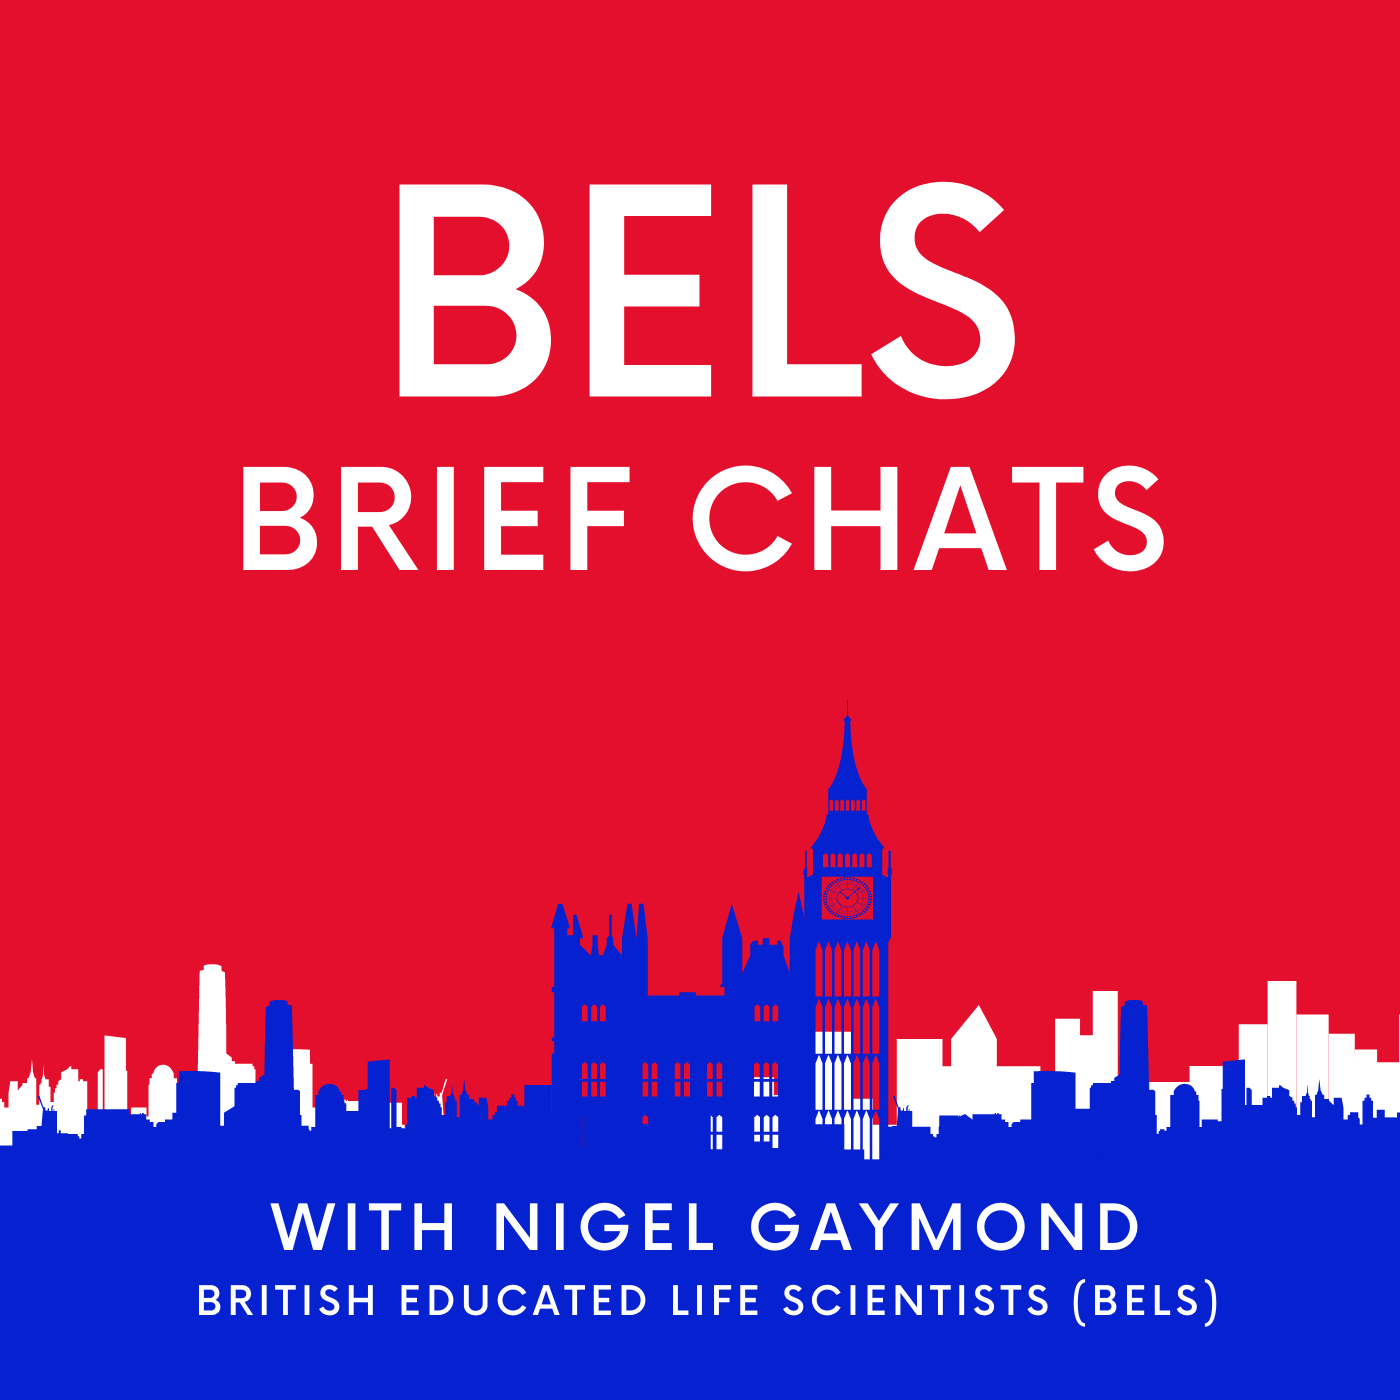 BELS Brief Chats podcast